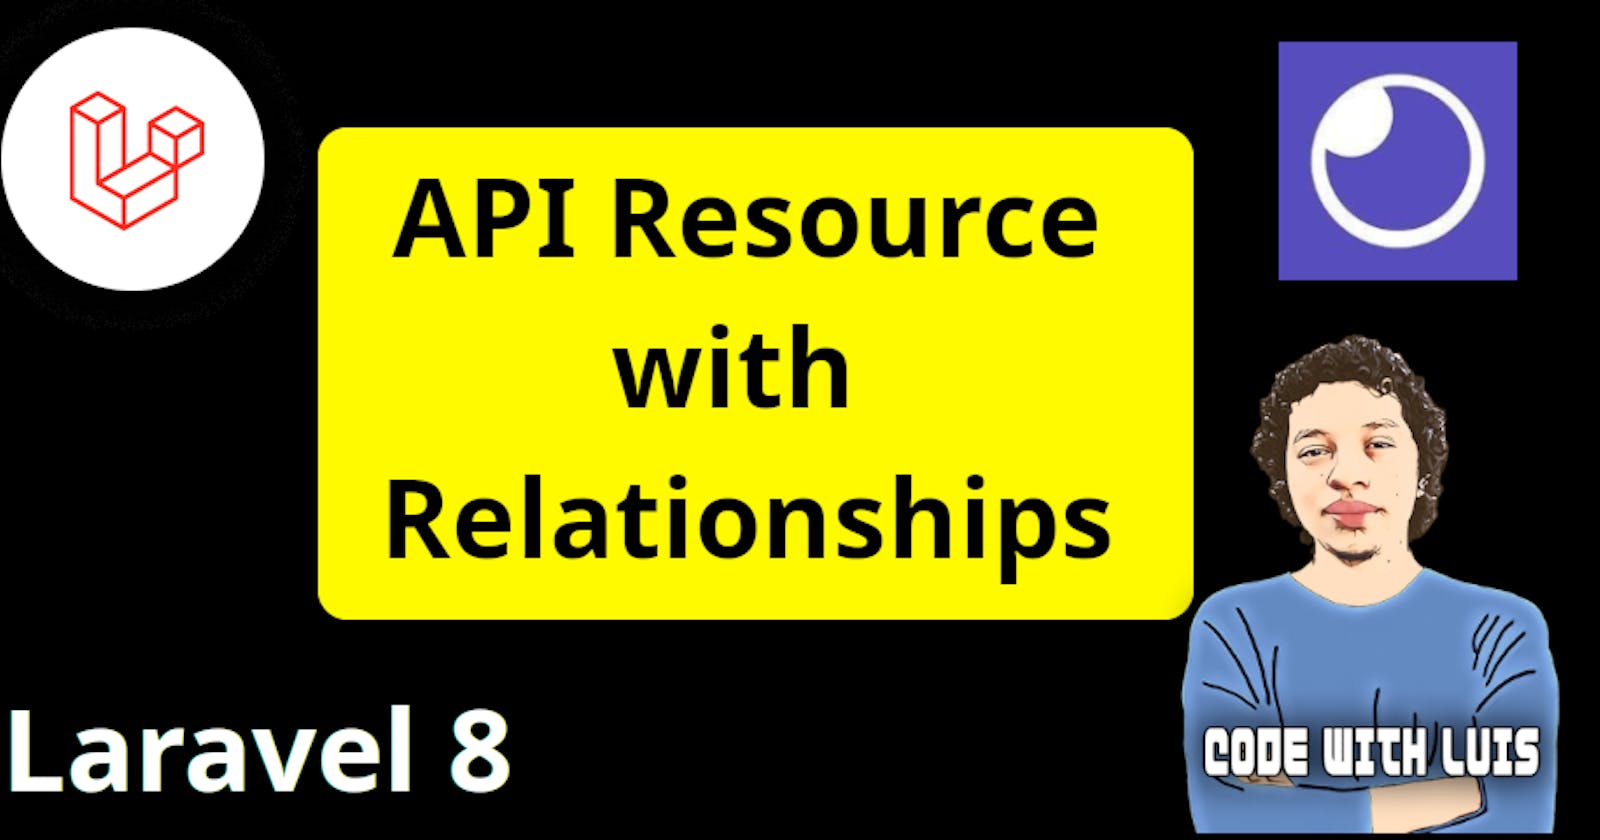 Laravel: How To Load Relationships in API Resources